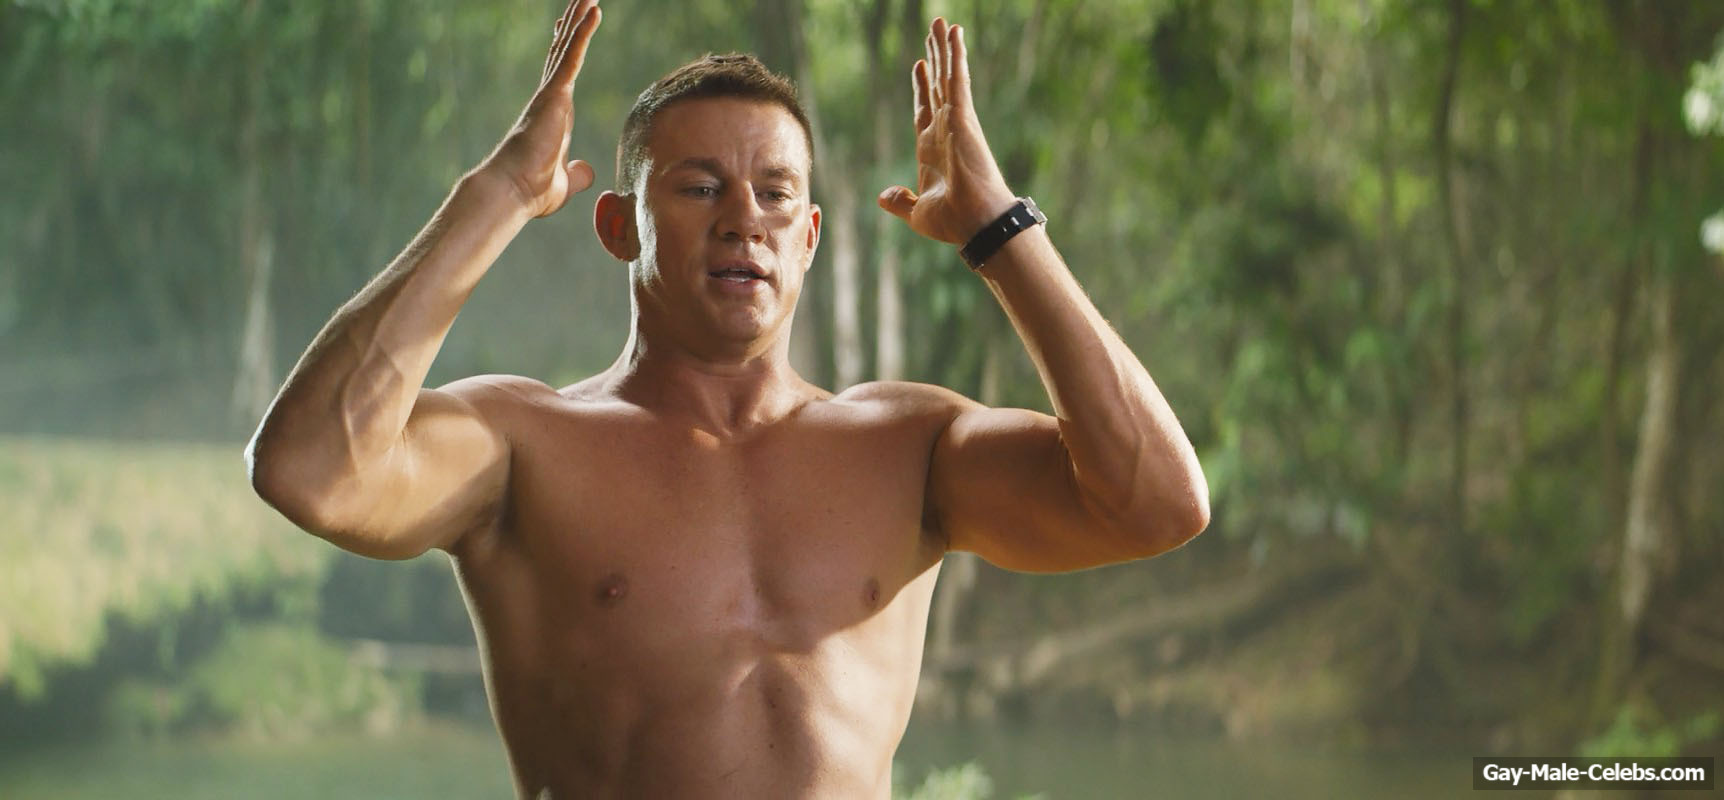 Channing Tatum Nude And Sexy in The Lost City